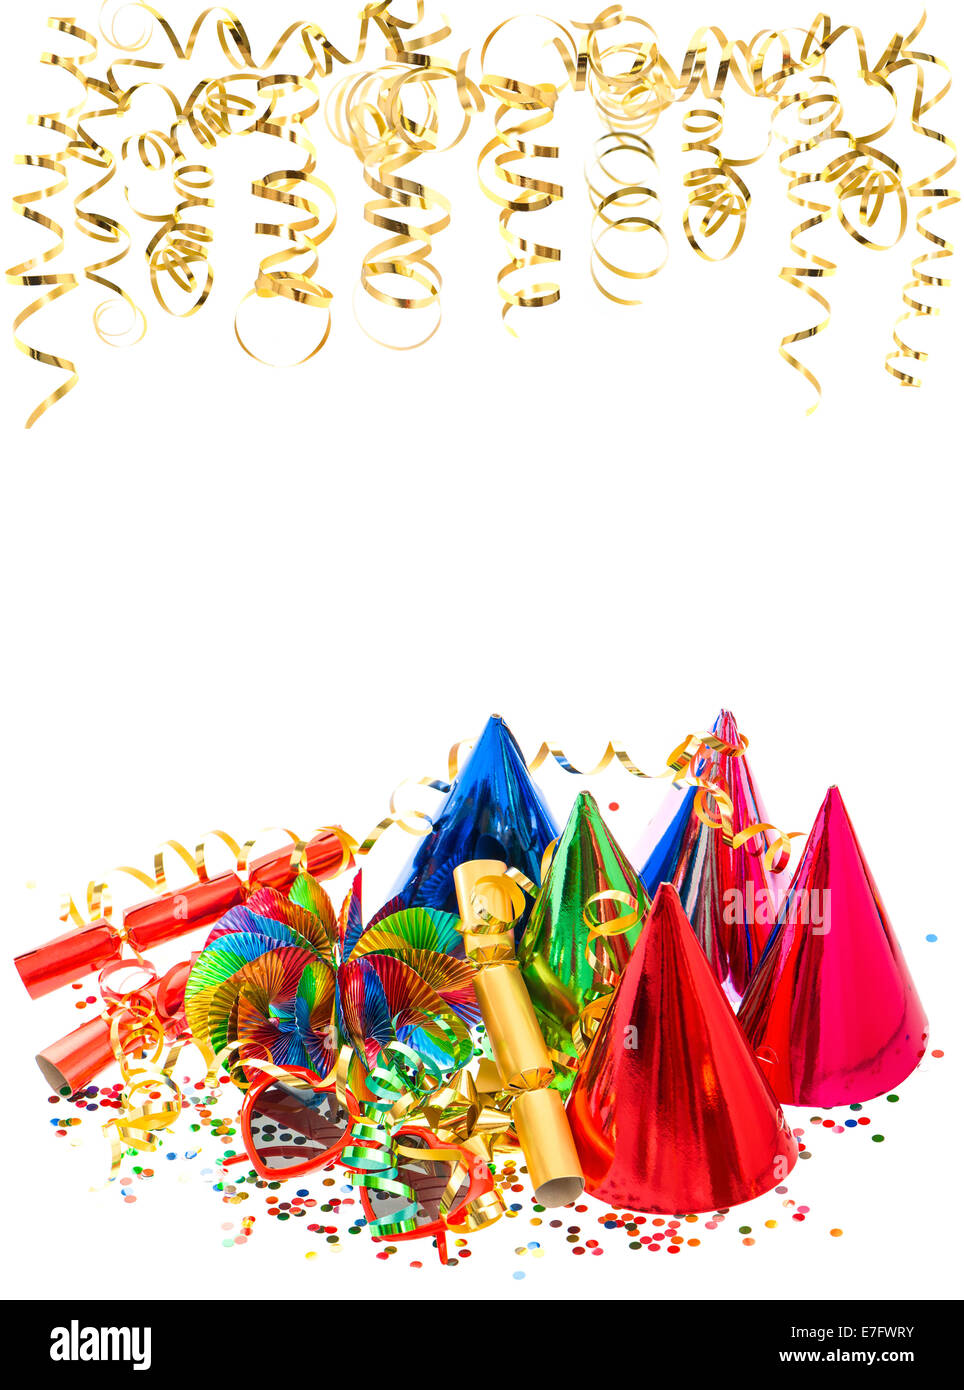 colorful garlands, golden serpentine, party hats and confetti. festive birthday decoration background Stock Photo